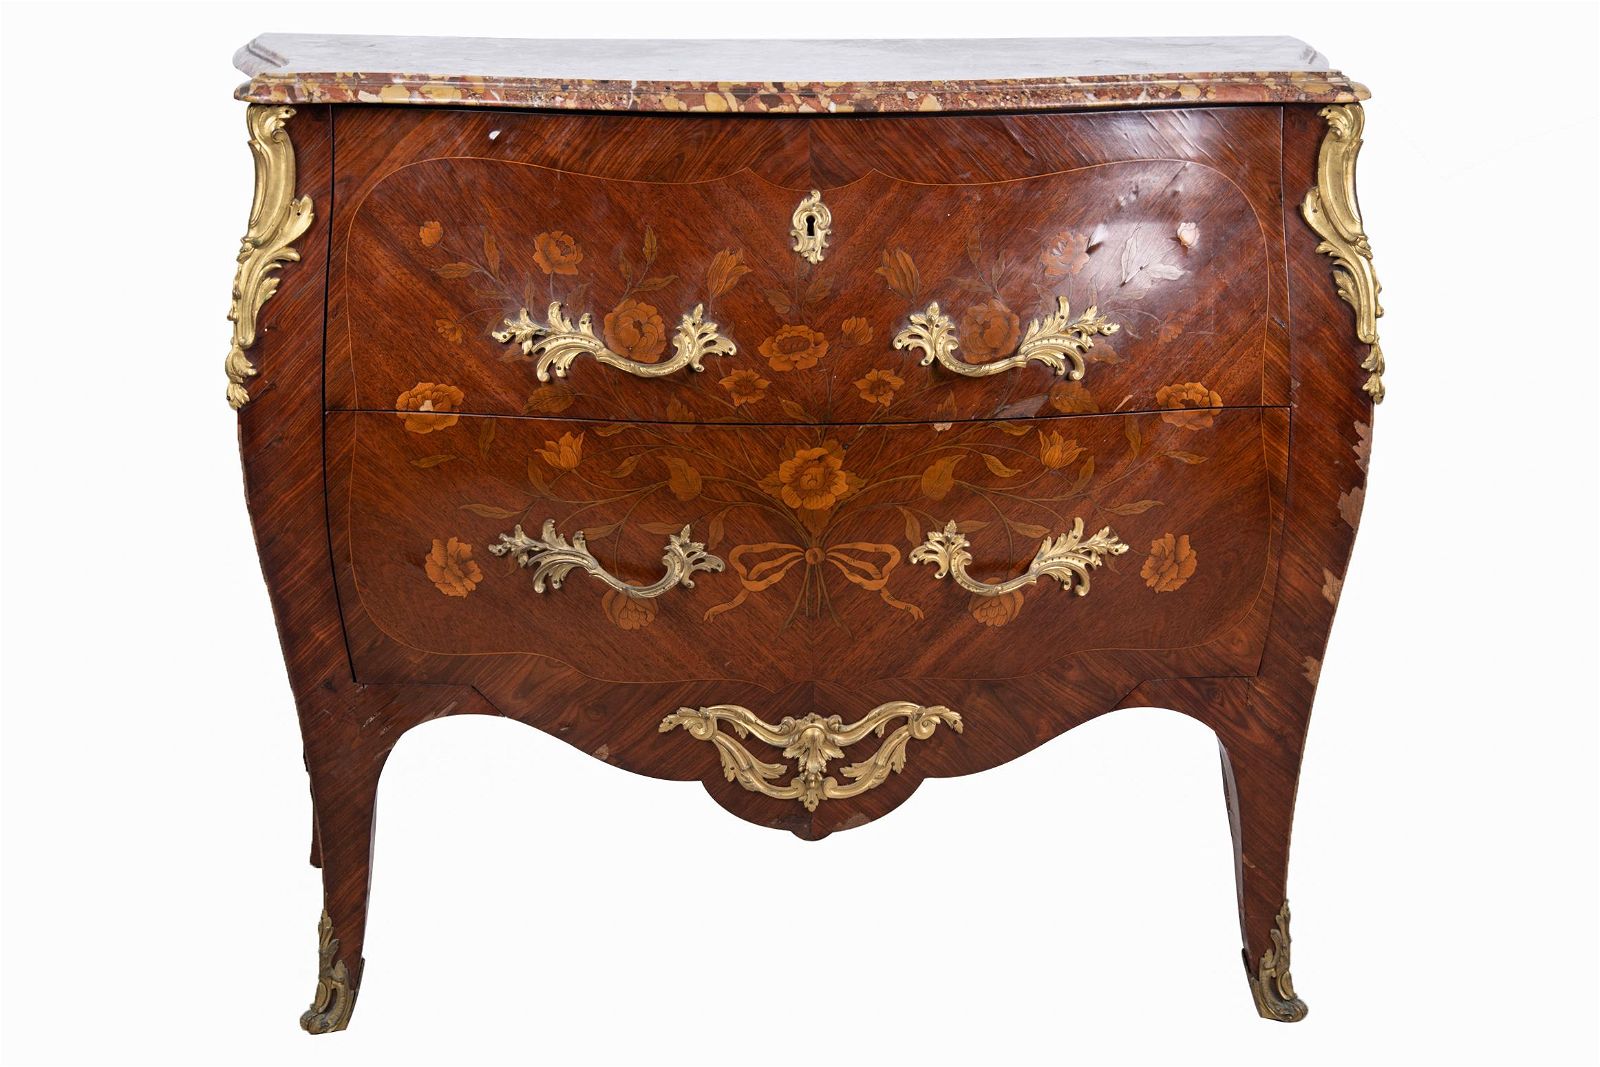 FRENCH GILT BRONZE-MOUNTED MARQUETRY-INLAID